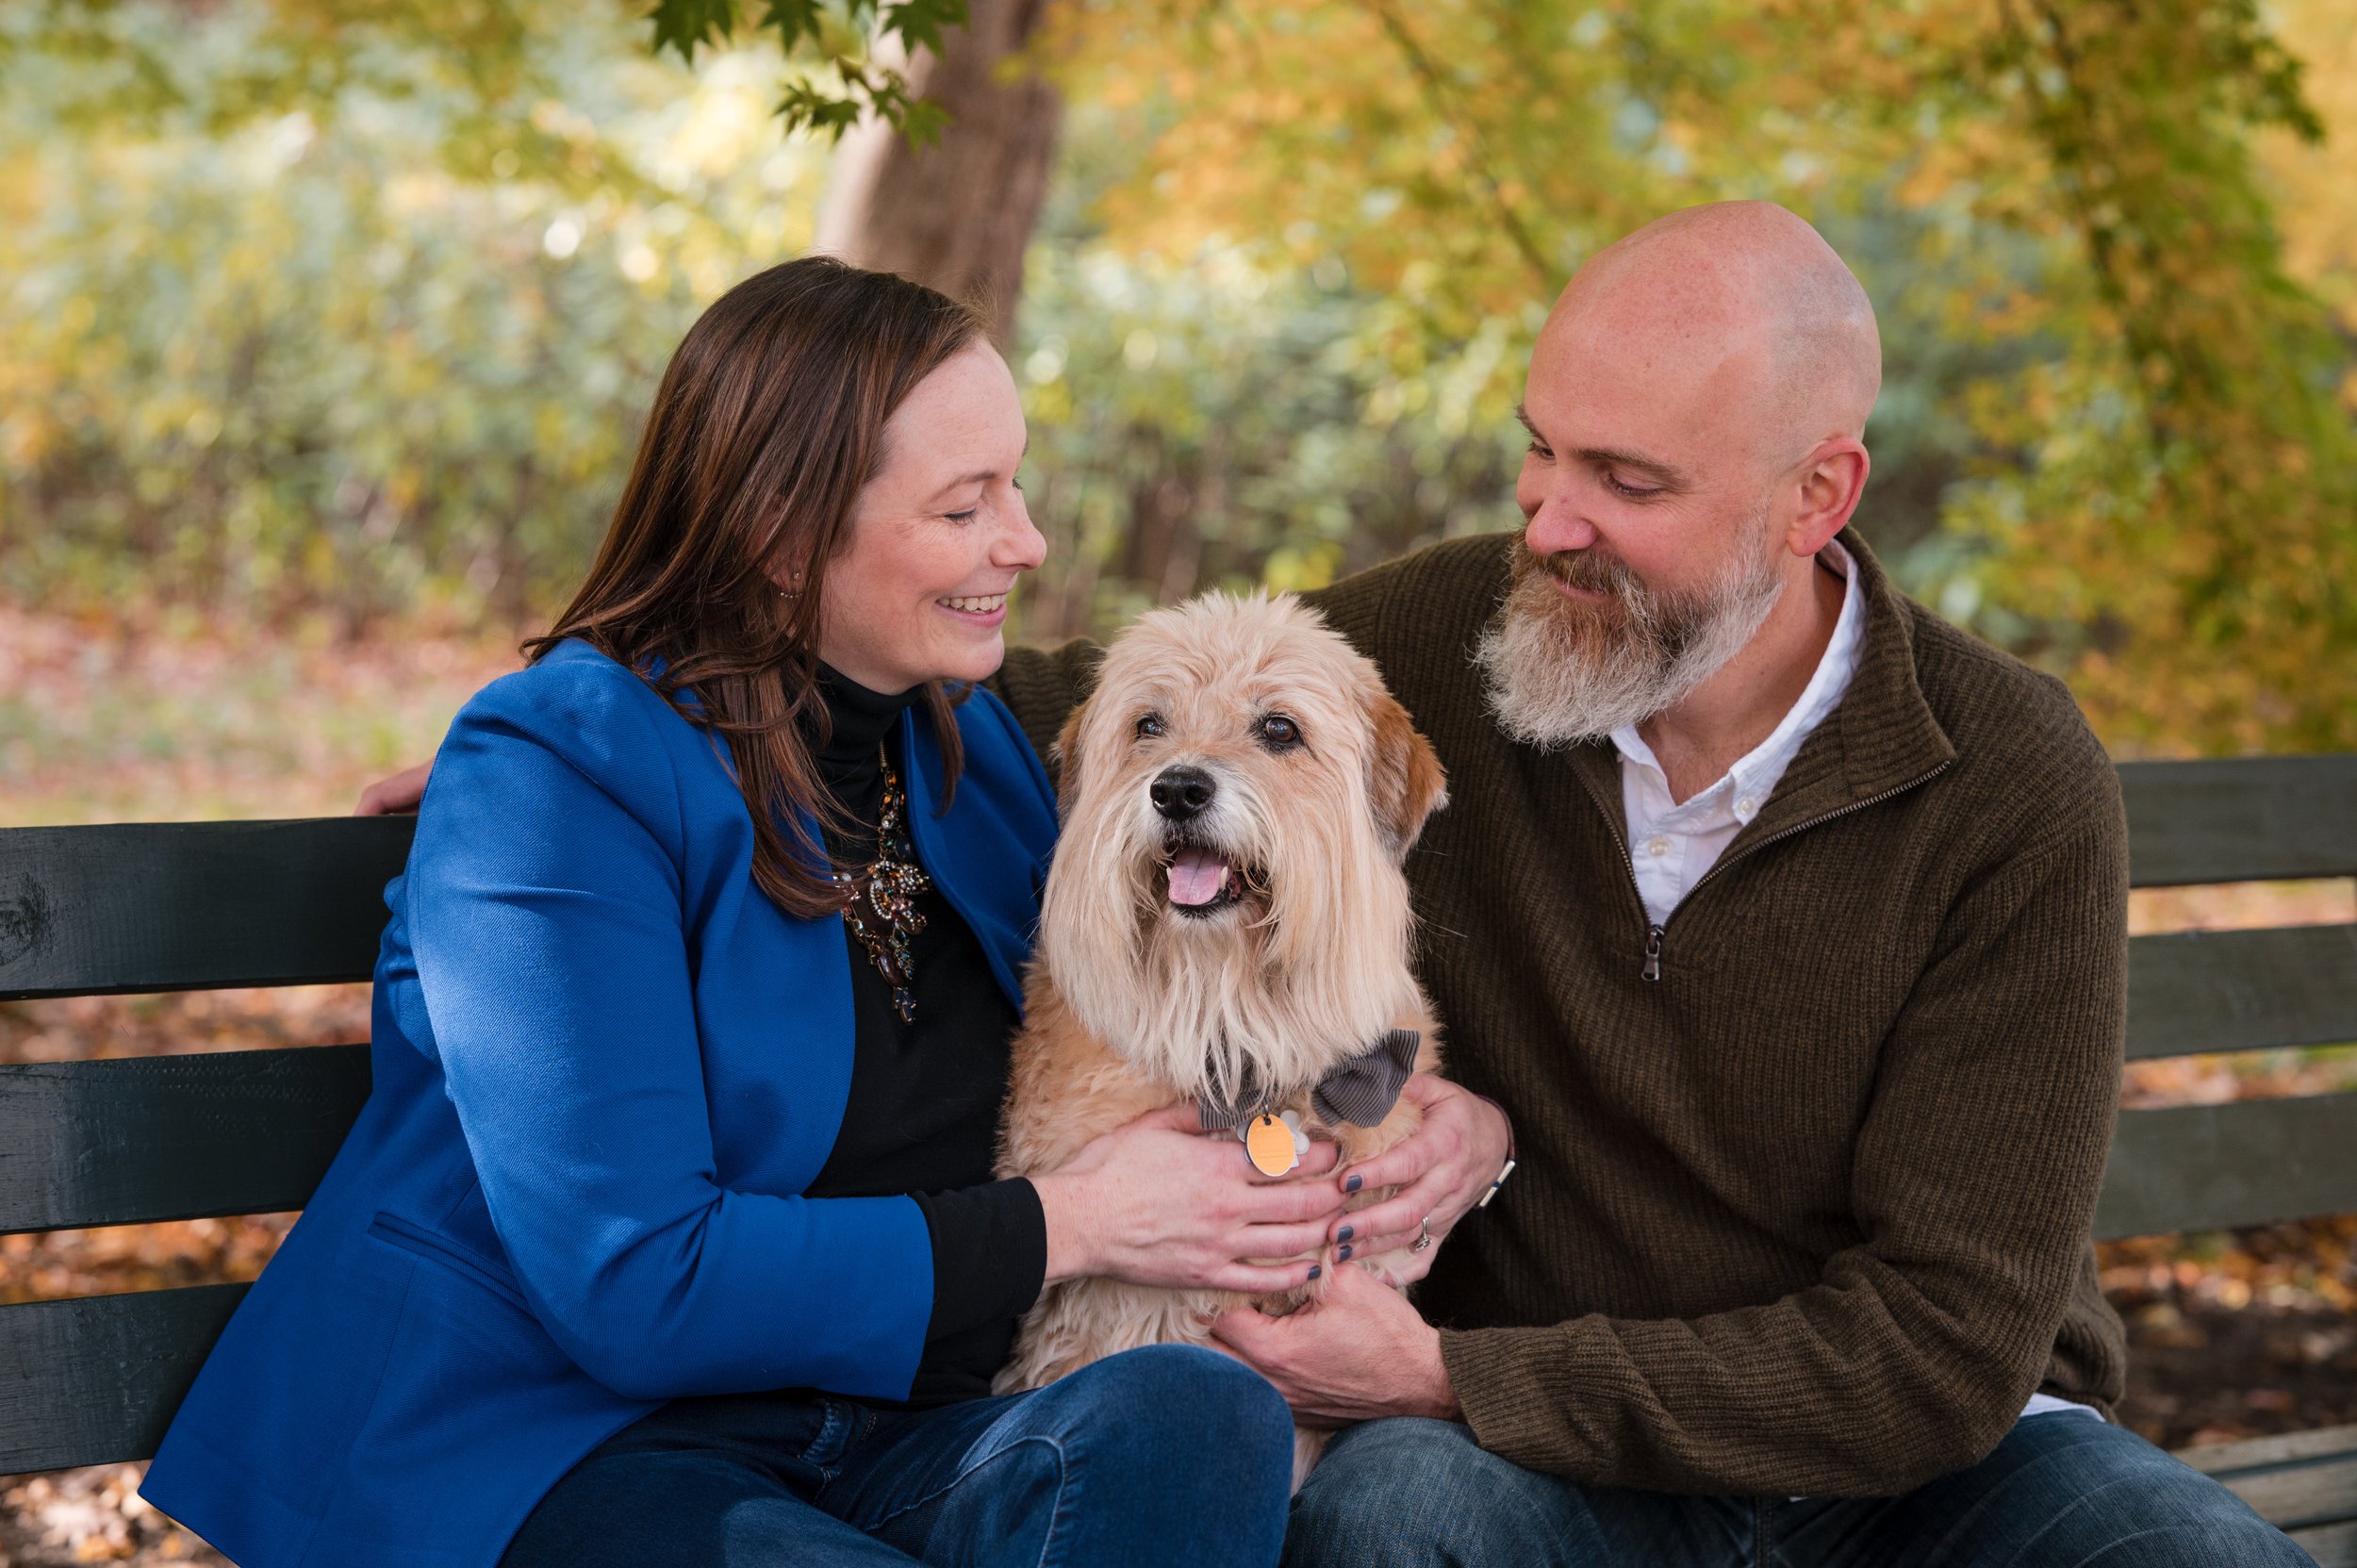 outdoor family and pet portrait in boston fall weather by Michelle Schapiro Photography